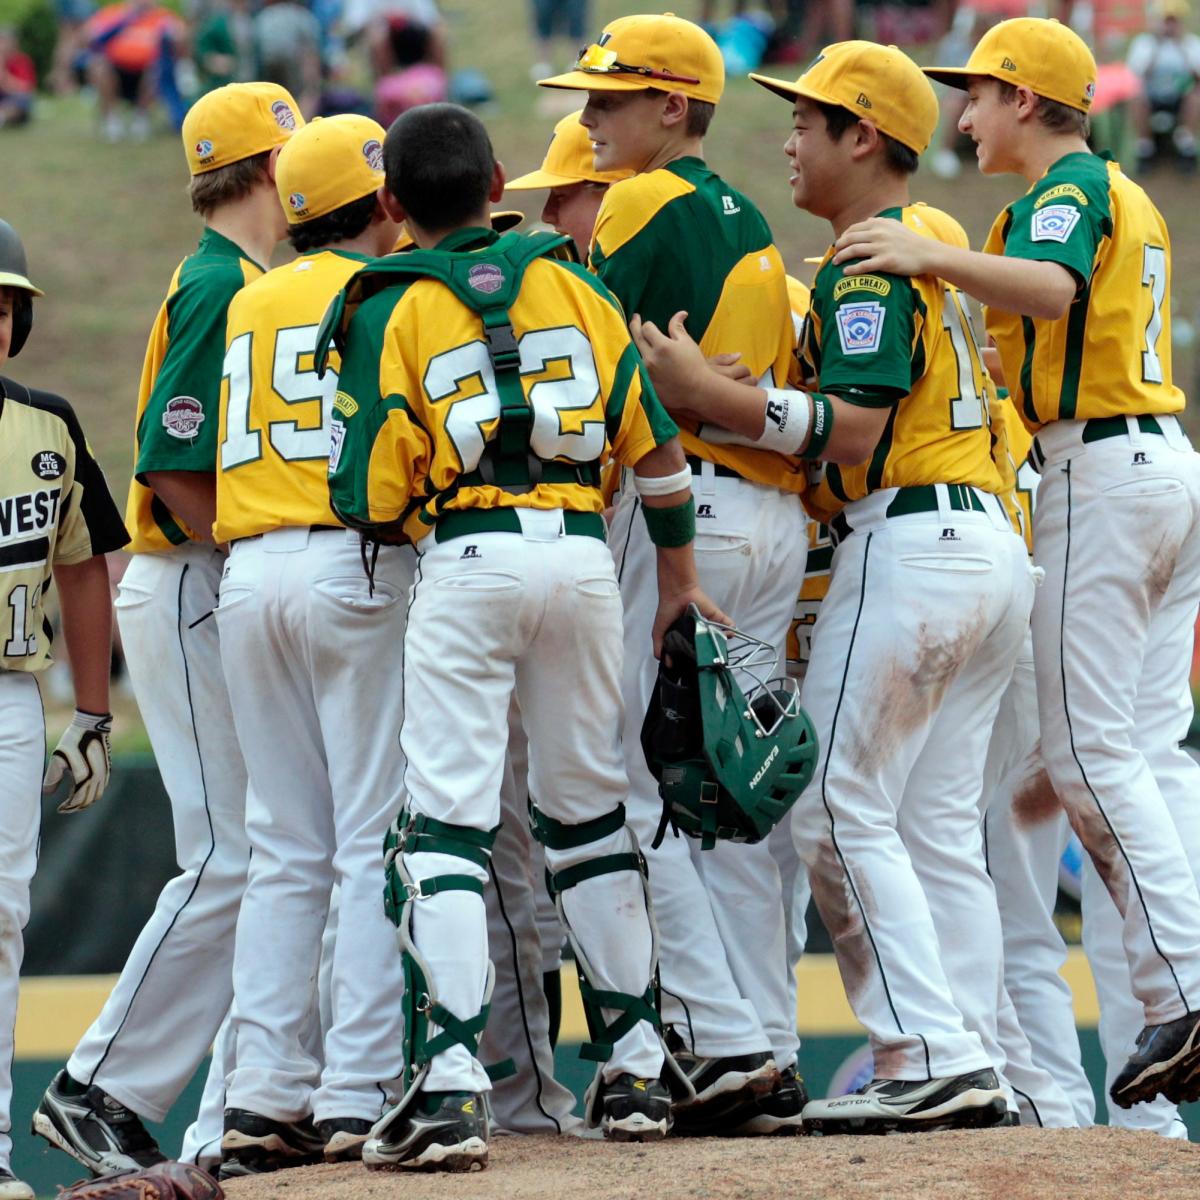 Little League World Series 2012: Analyzing 2 Solid Stars with Bright